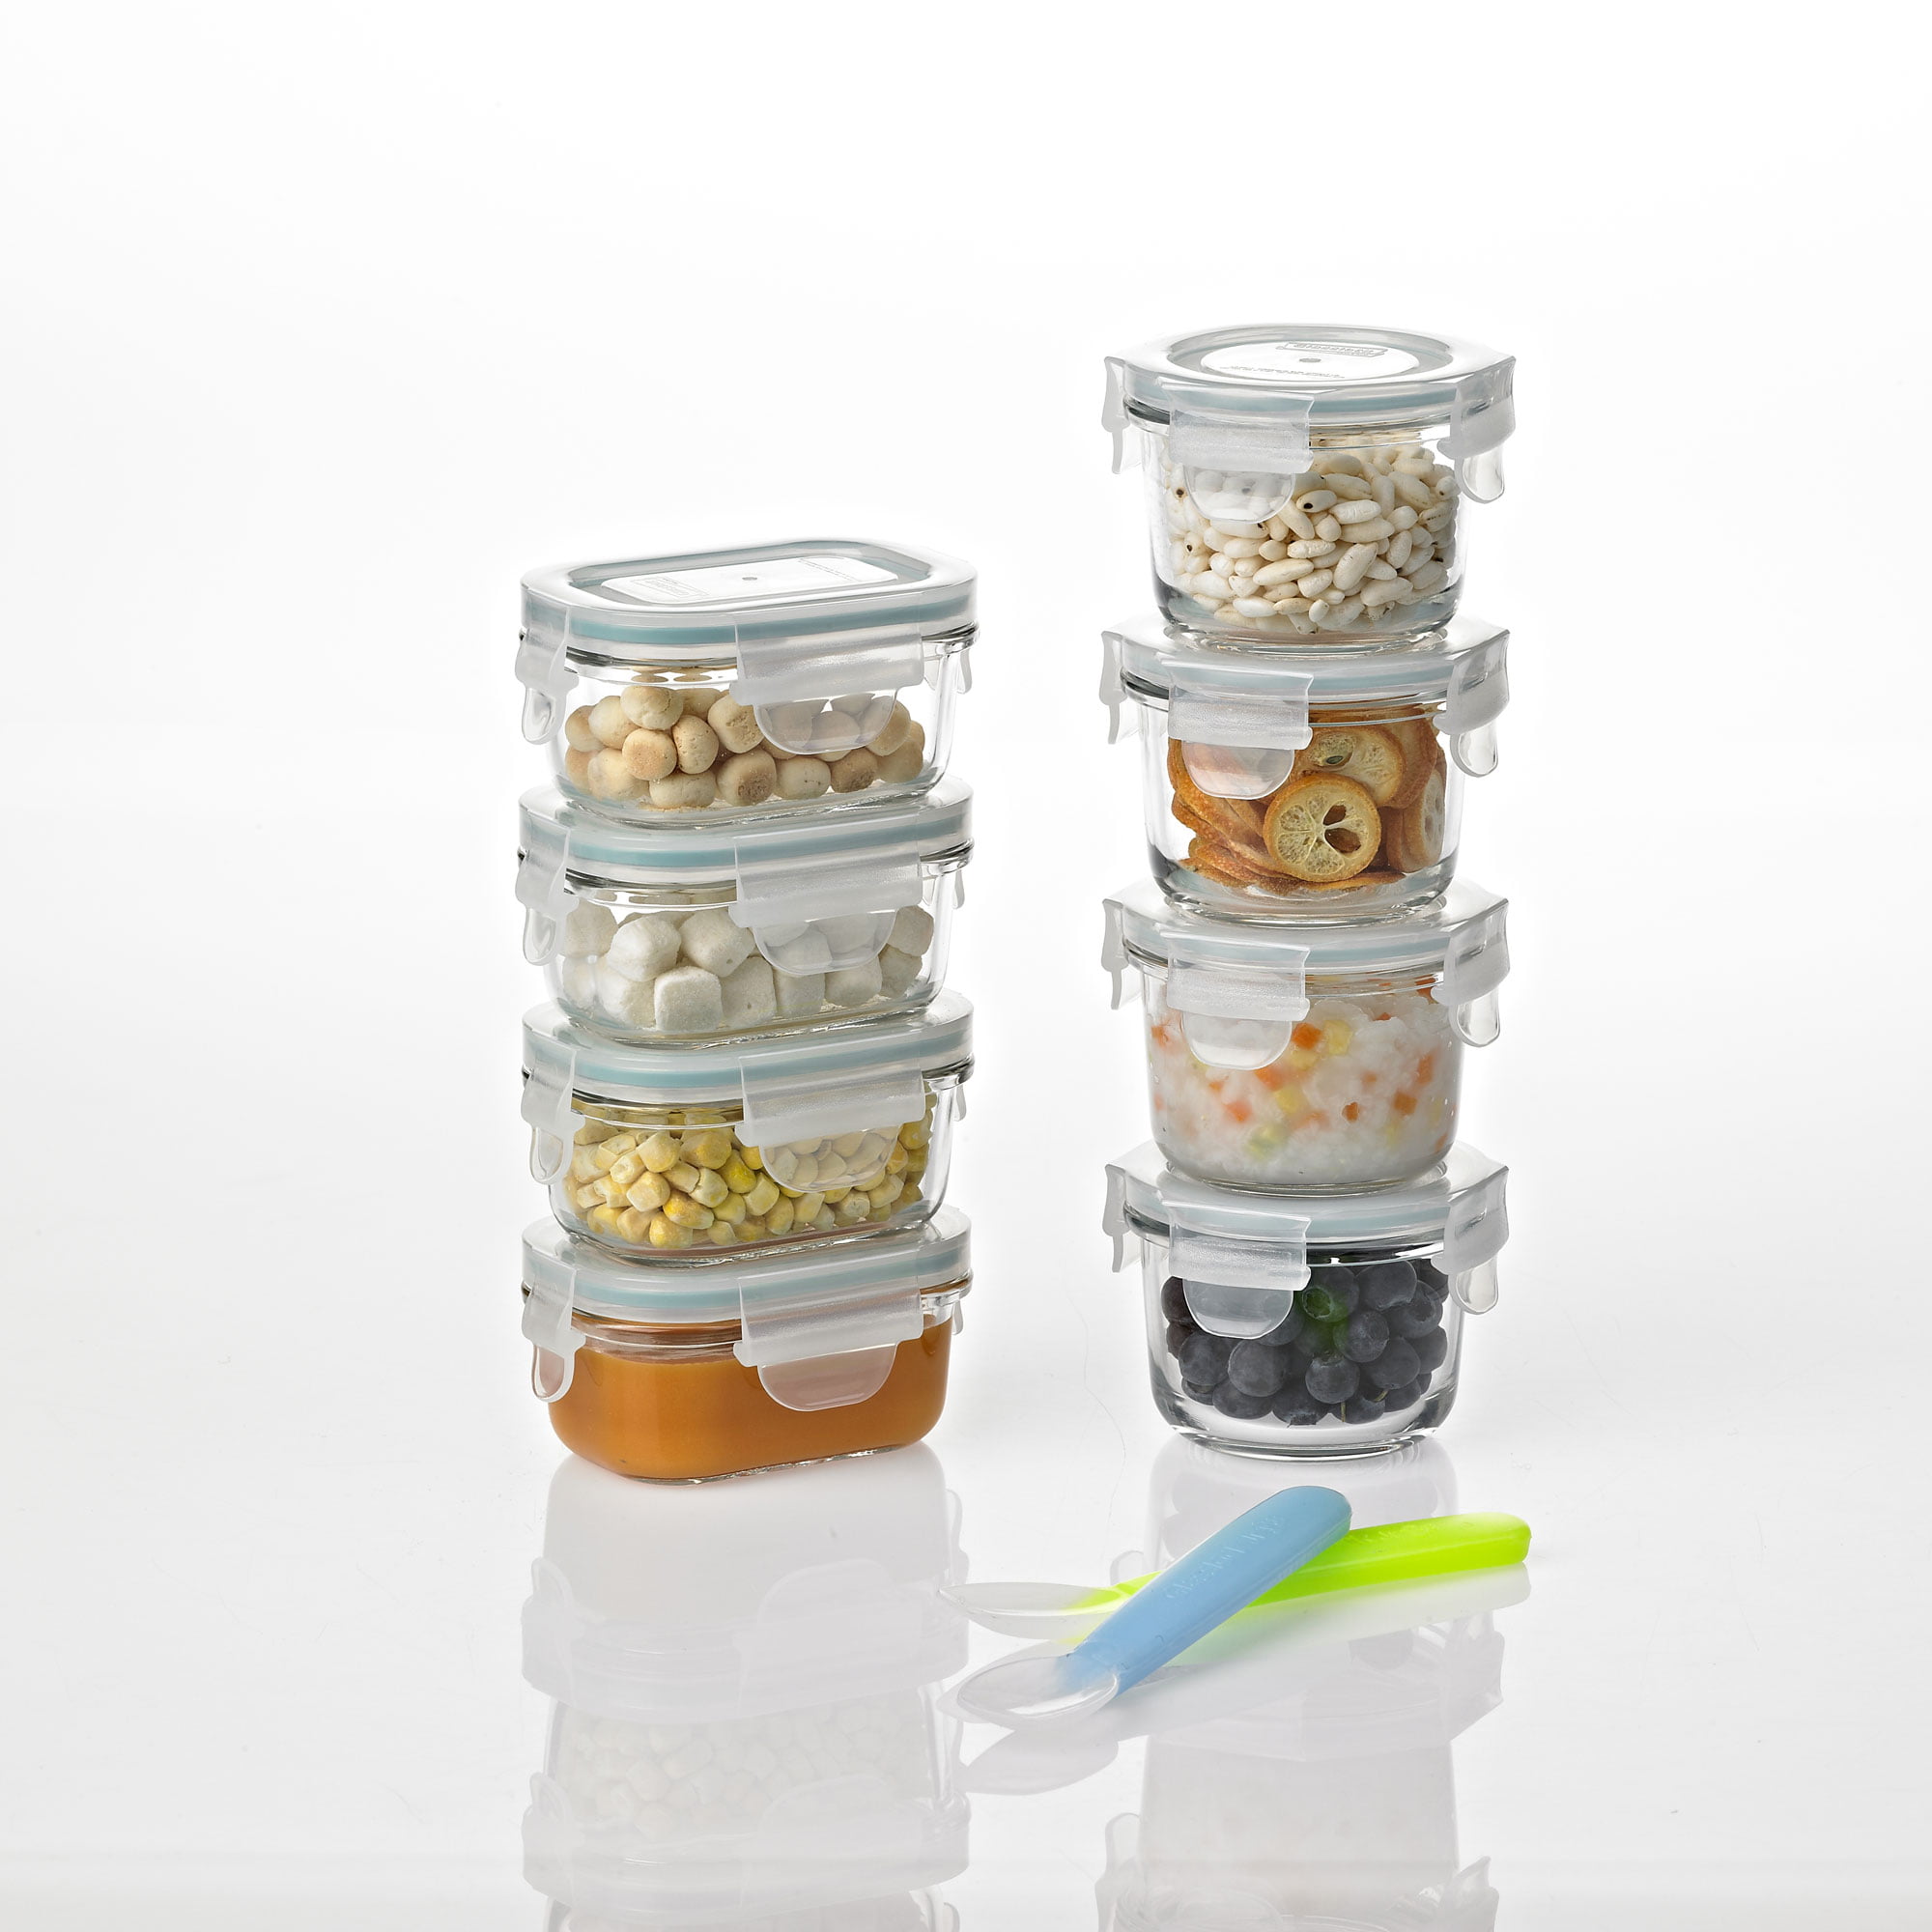 Glasslock Mini 5 and 7 Ounce Tempered Glass Food Storage Container Set, 8  Pieces, 1 Piece - Fry's Food Stores